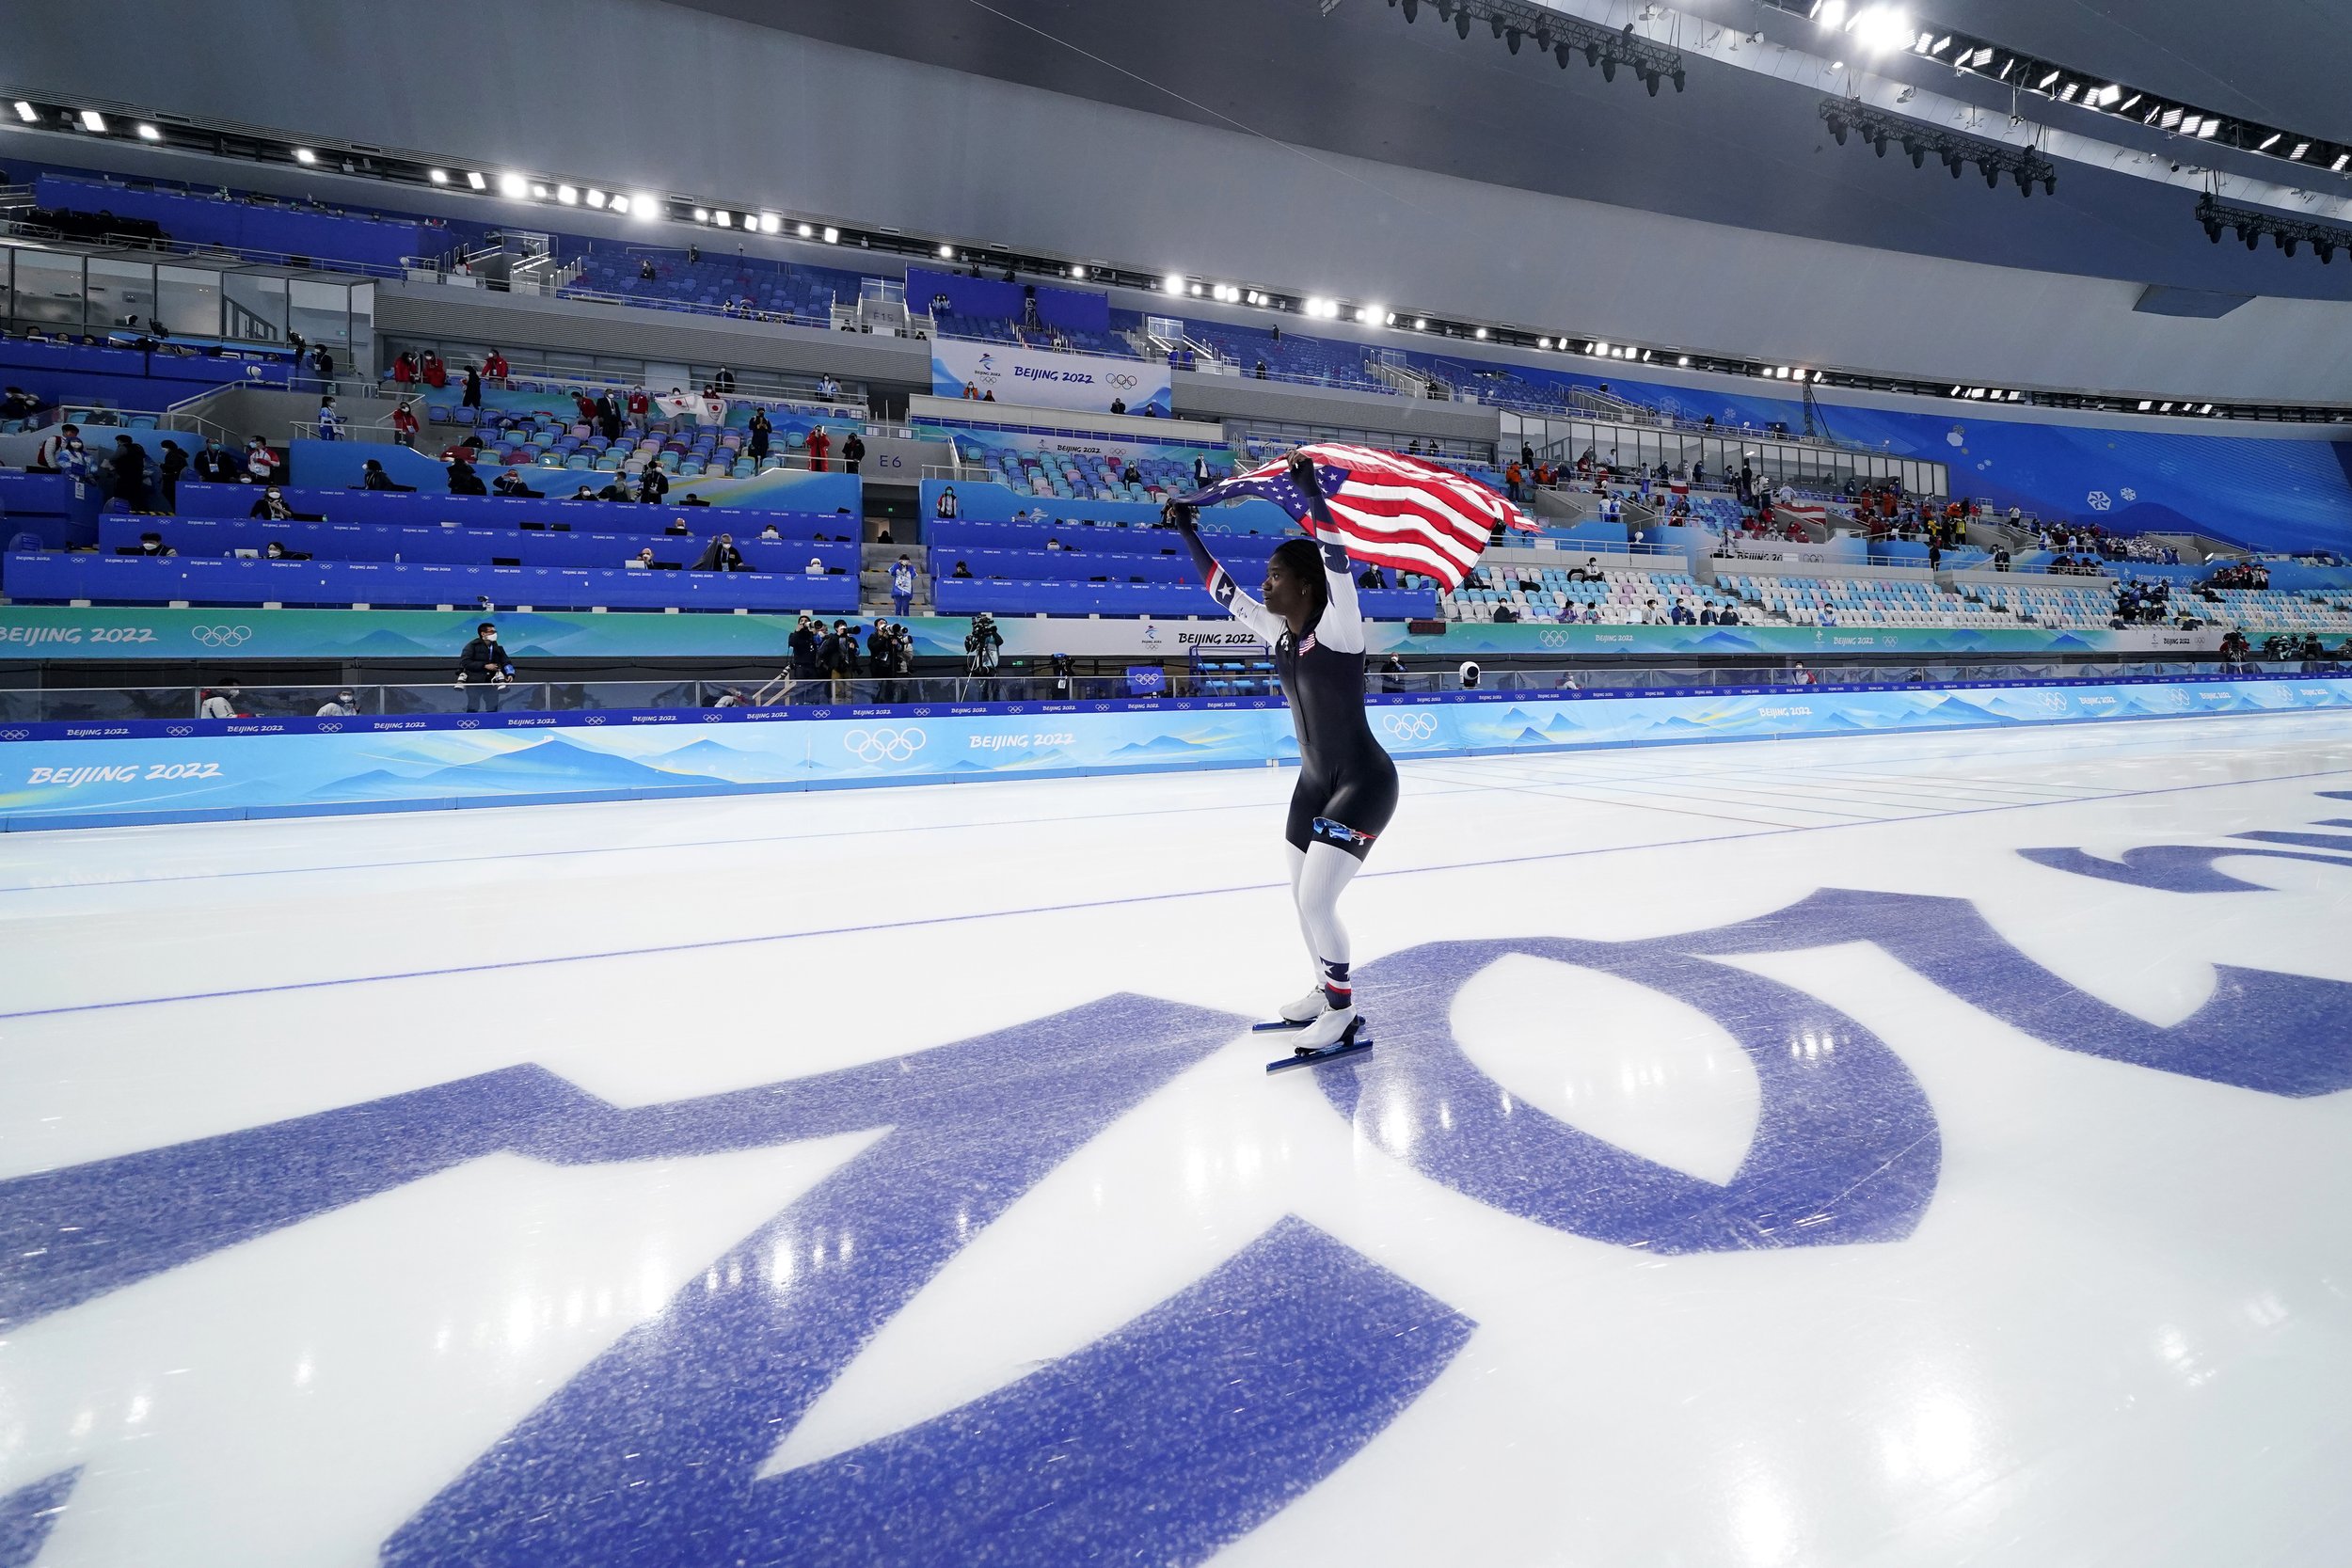  Erin Jackson of the United States carries an American flag across the ice after winning the gold medal in the speedskating women's 500-meter race at the 2022 Winter Olympics, Sunday, Feb. 13, 2022, in Beijing. (AP Photo/Ashley Landis) 